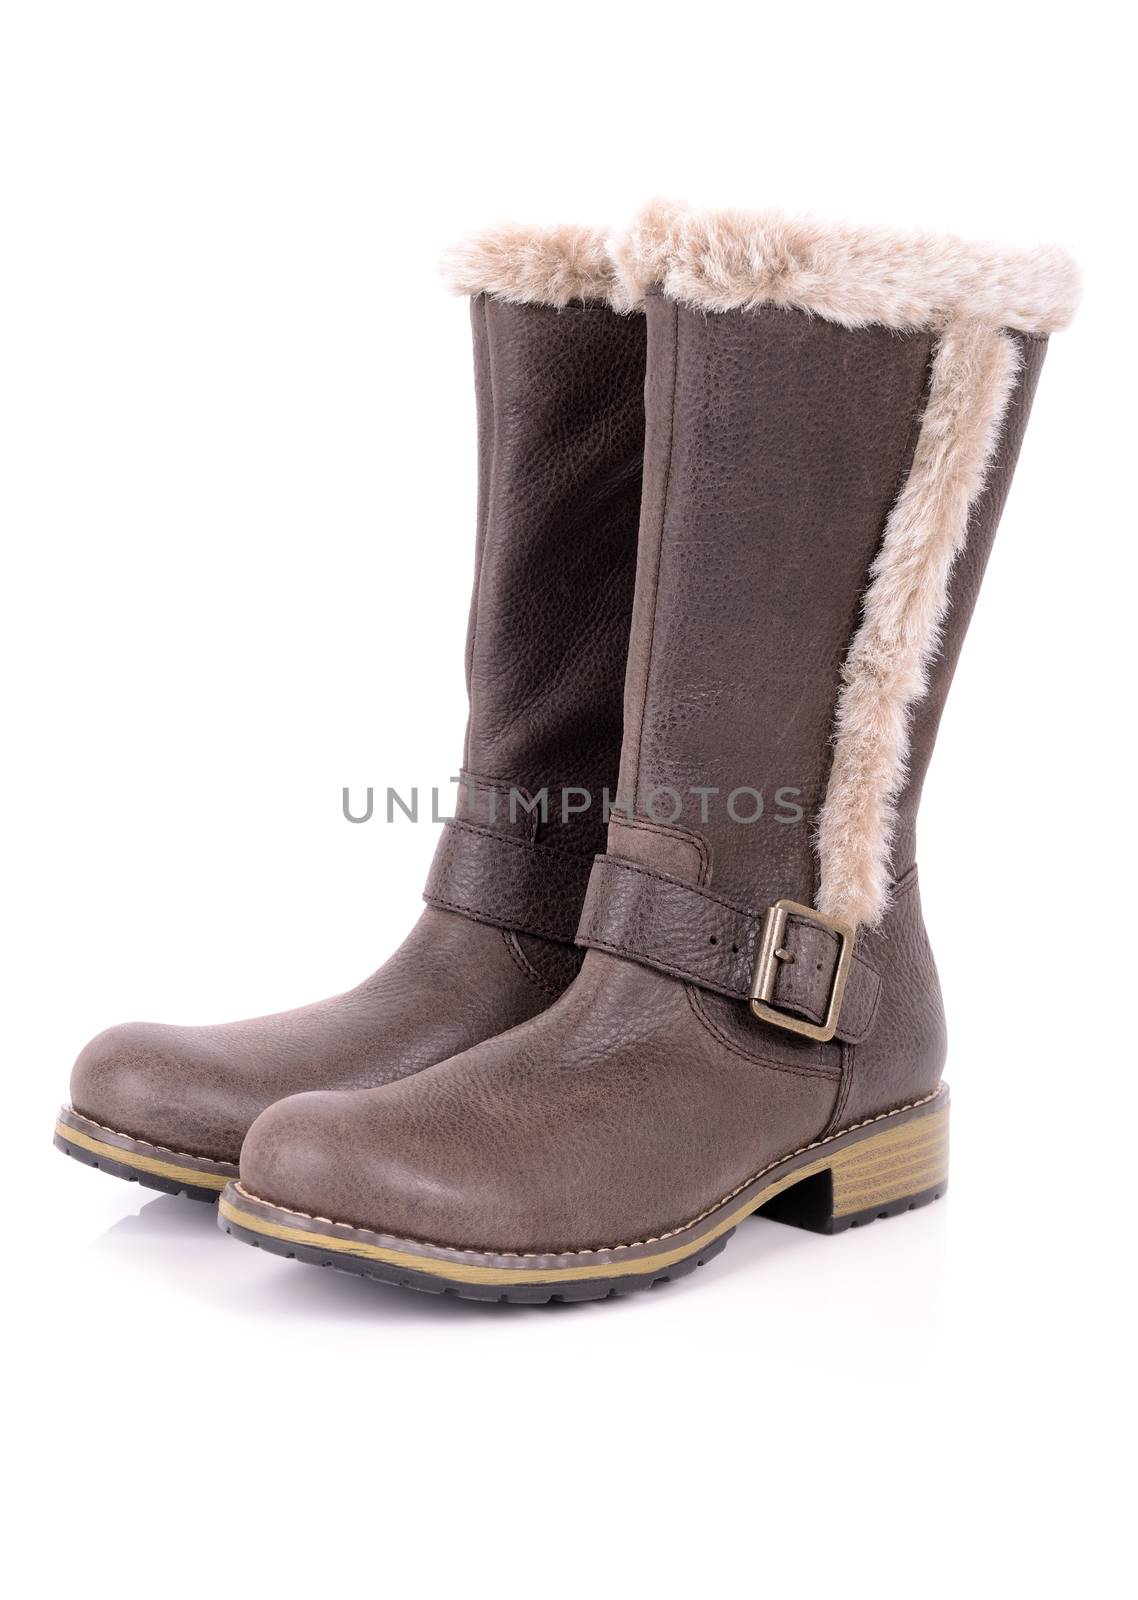 brown boots by hyrons